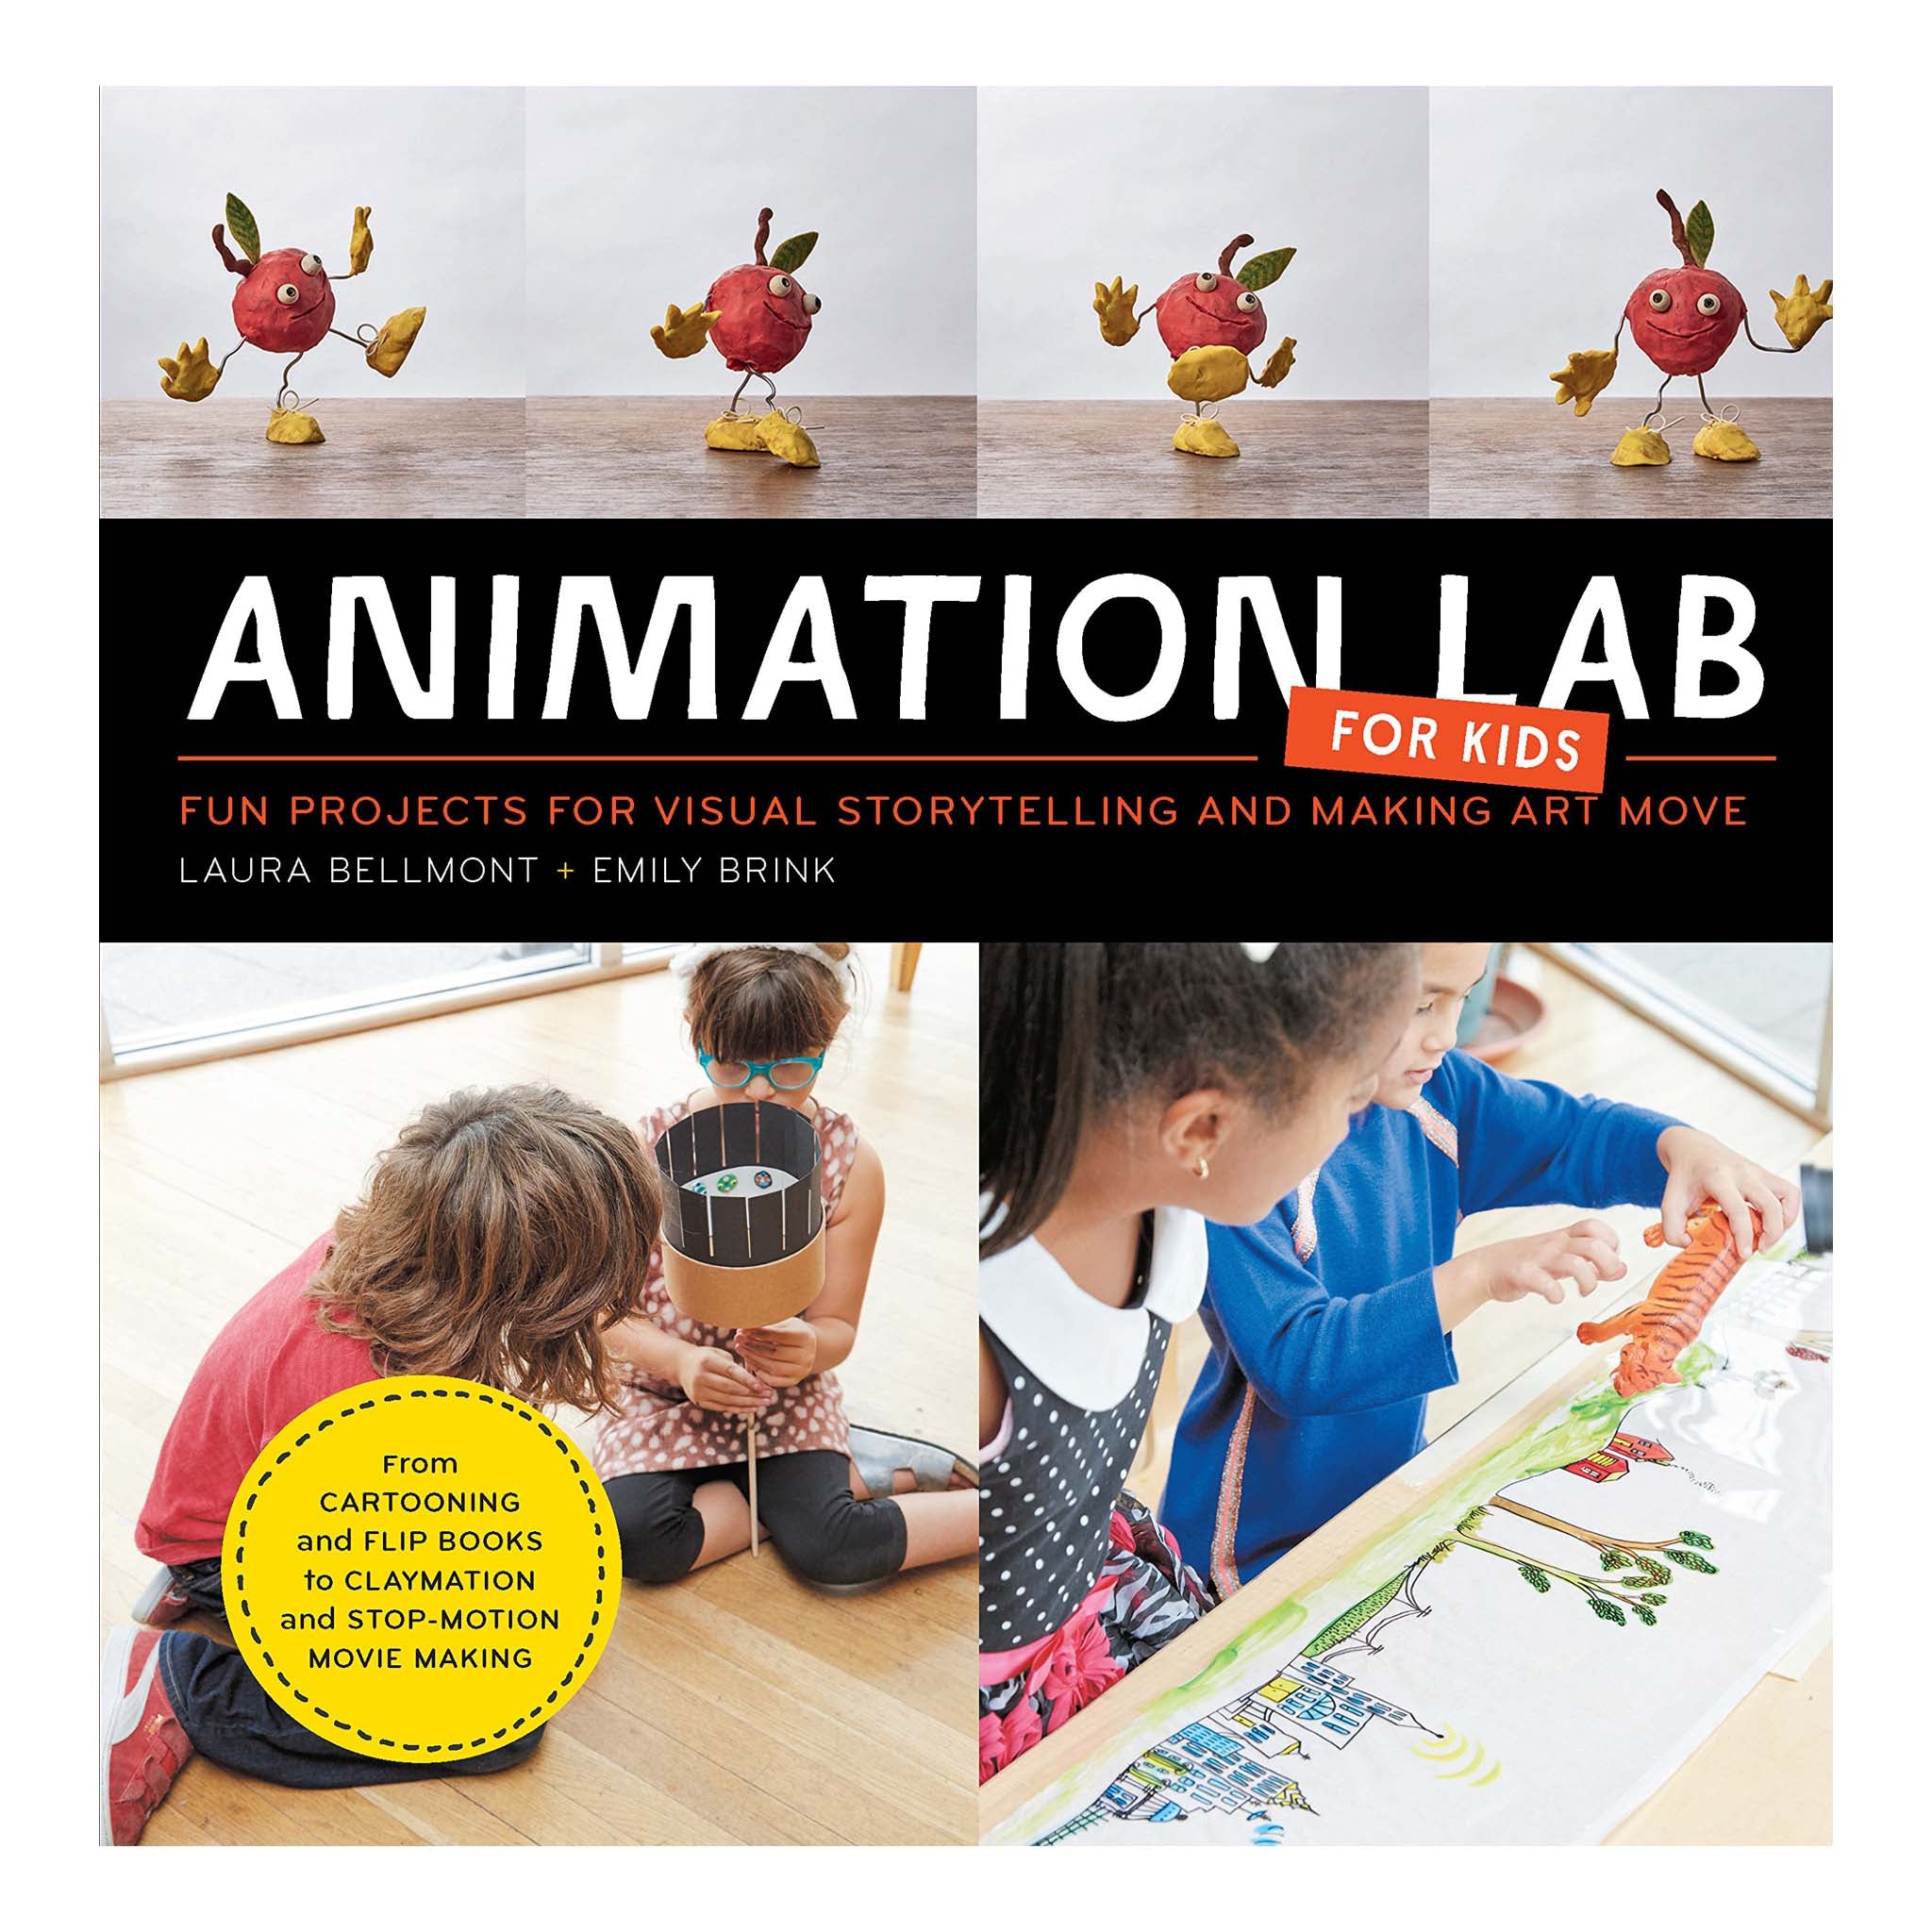 Animation Lab for Kids: Fun Projects for Visual Storytelling and Making Art Move - From Cartooning and Flip Books to Claymation and Stop-motion Movie Making [Book]